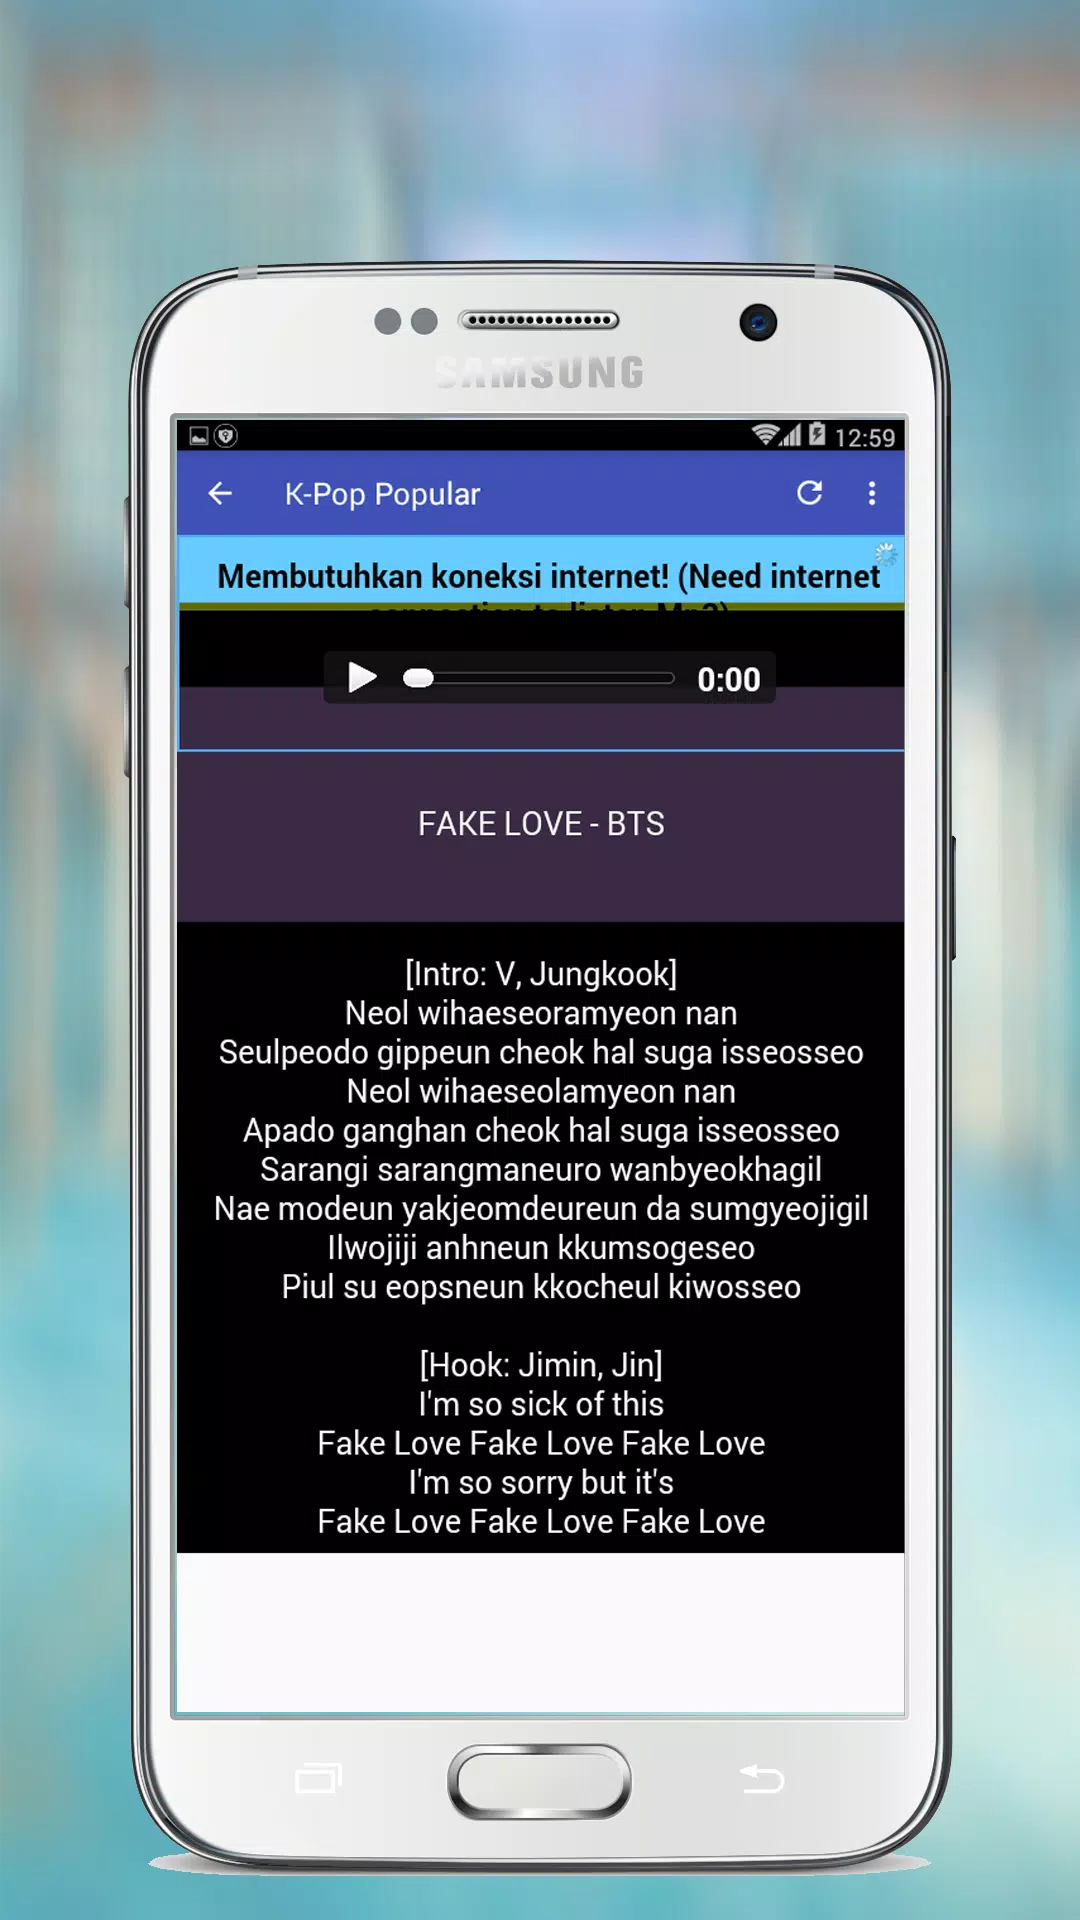 BTS - FAKE LOVE Mp3 for Android - APK Download